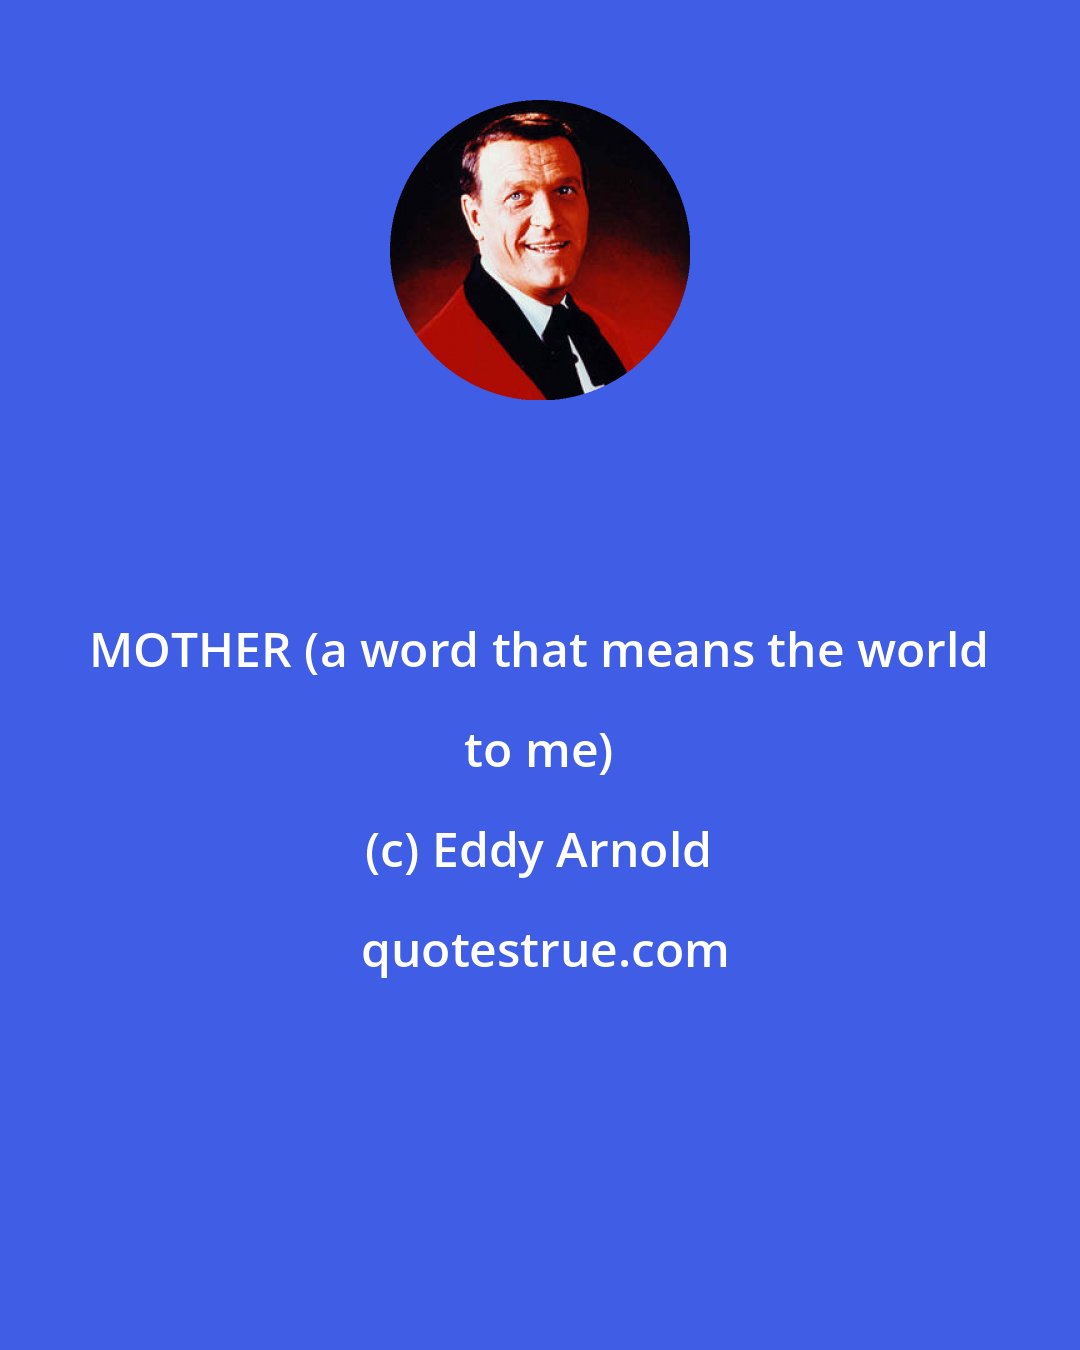 Eddy Arnold: MOTHER (a word that means the world to me)